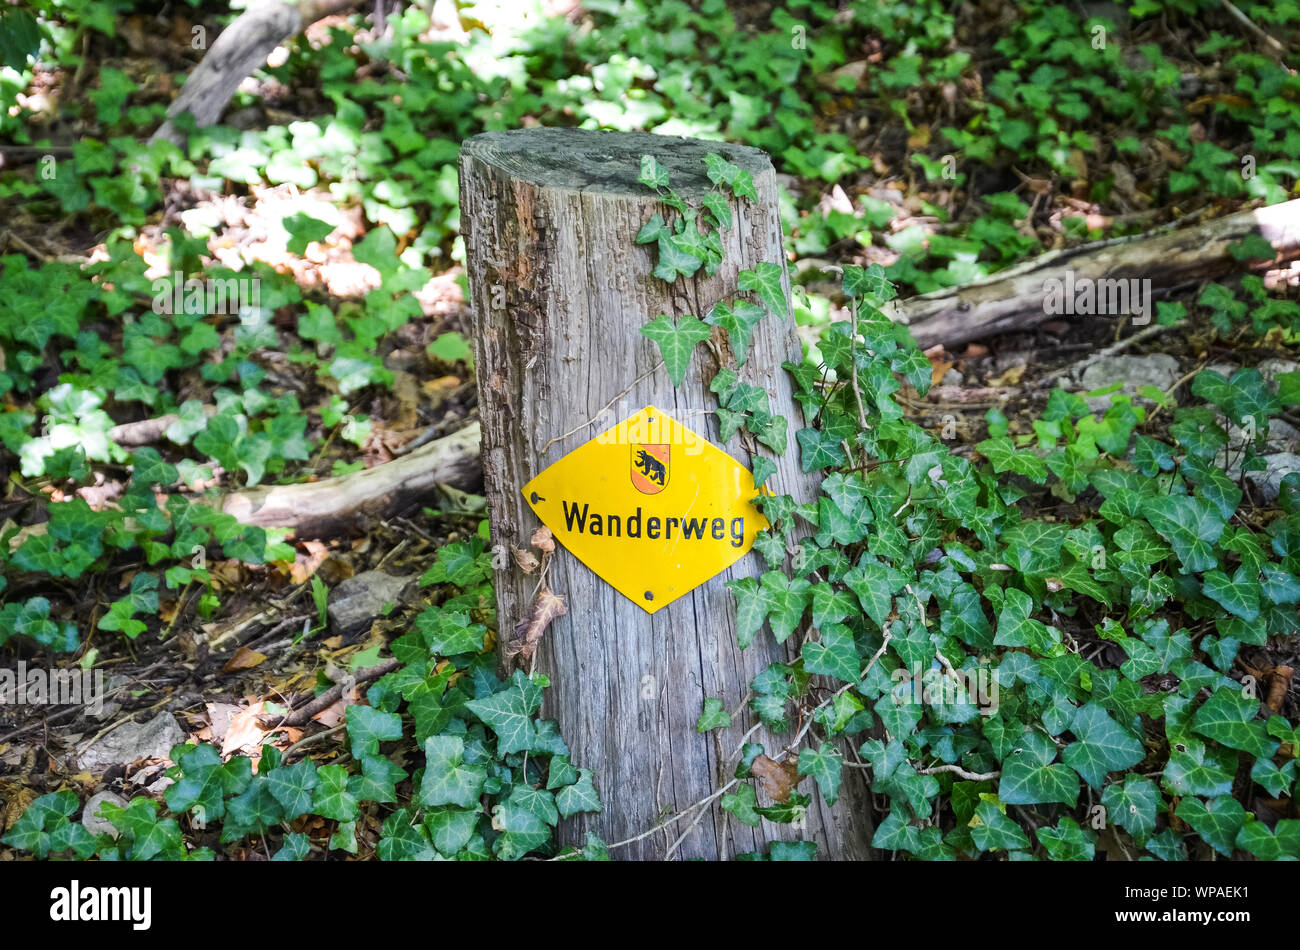 Yellow hiking trail mark on a wooden stump in nature. Sign TRANSLATION: Wanderweg - trail, hiking path in German. Tourist signs help for orientation on a hiking path. Trailblazing, waymarking. Stock Photo